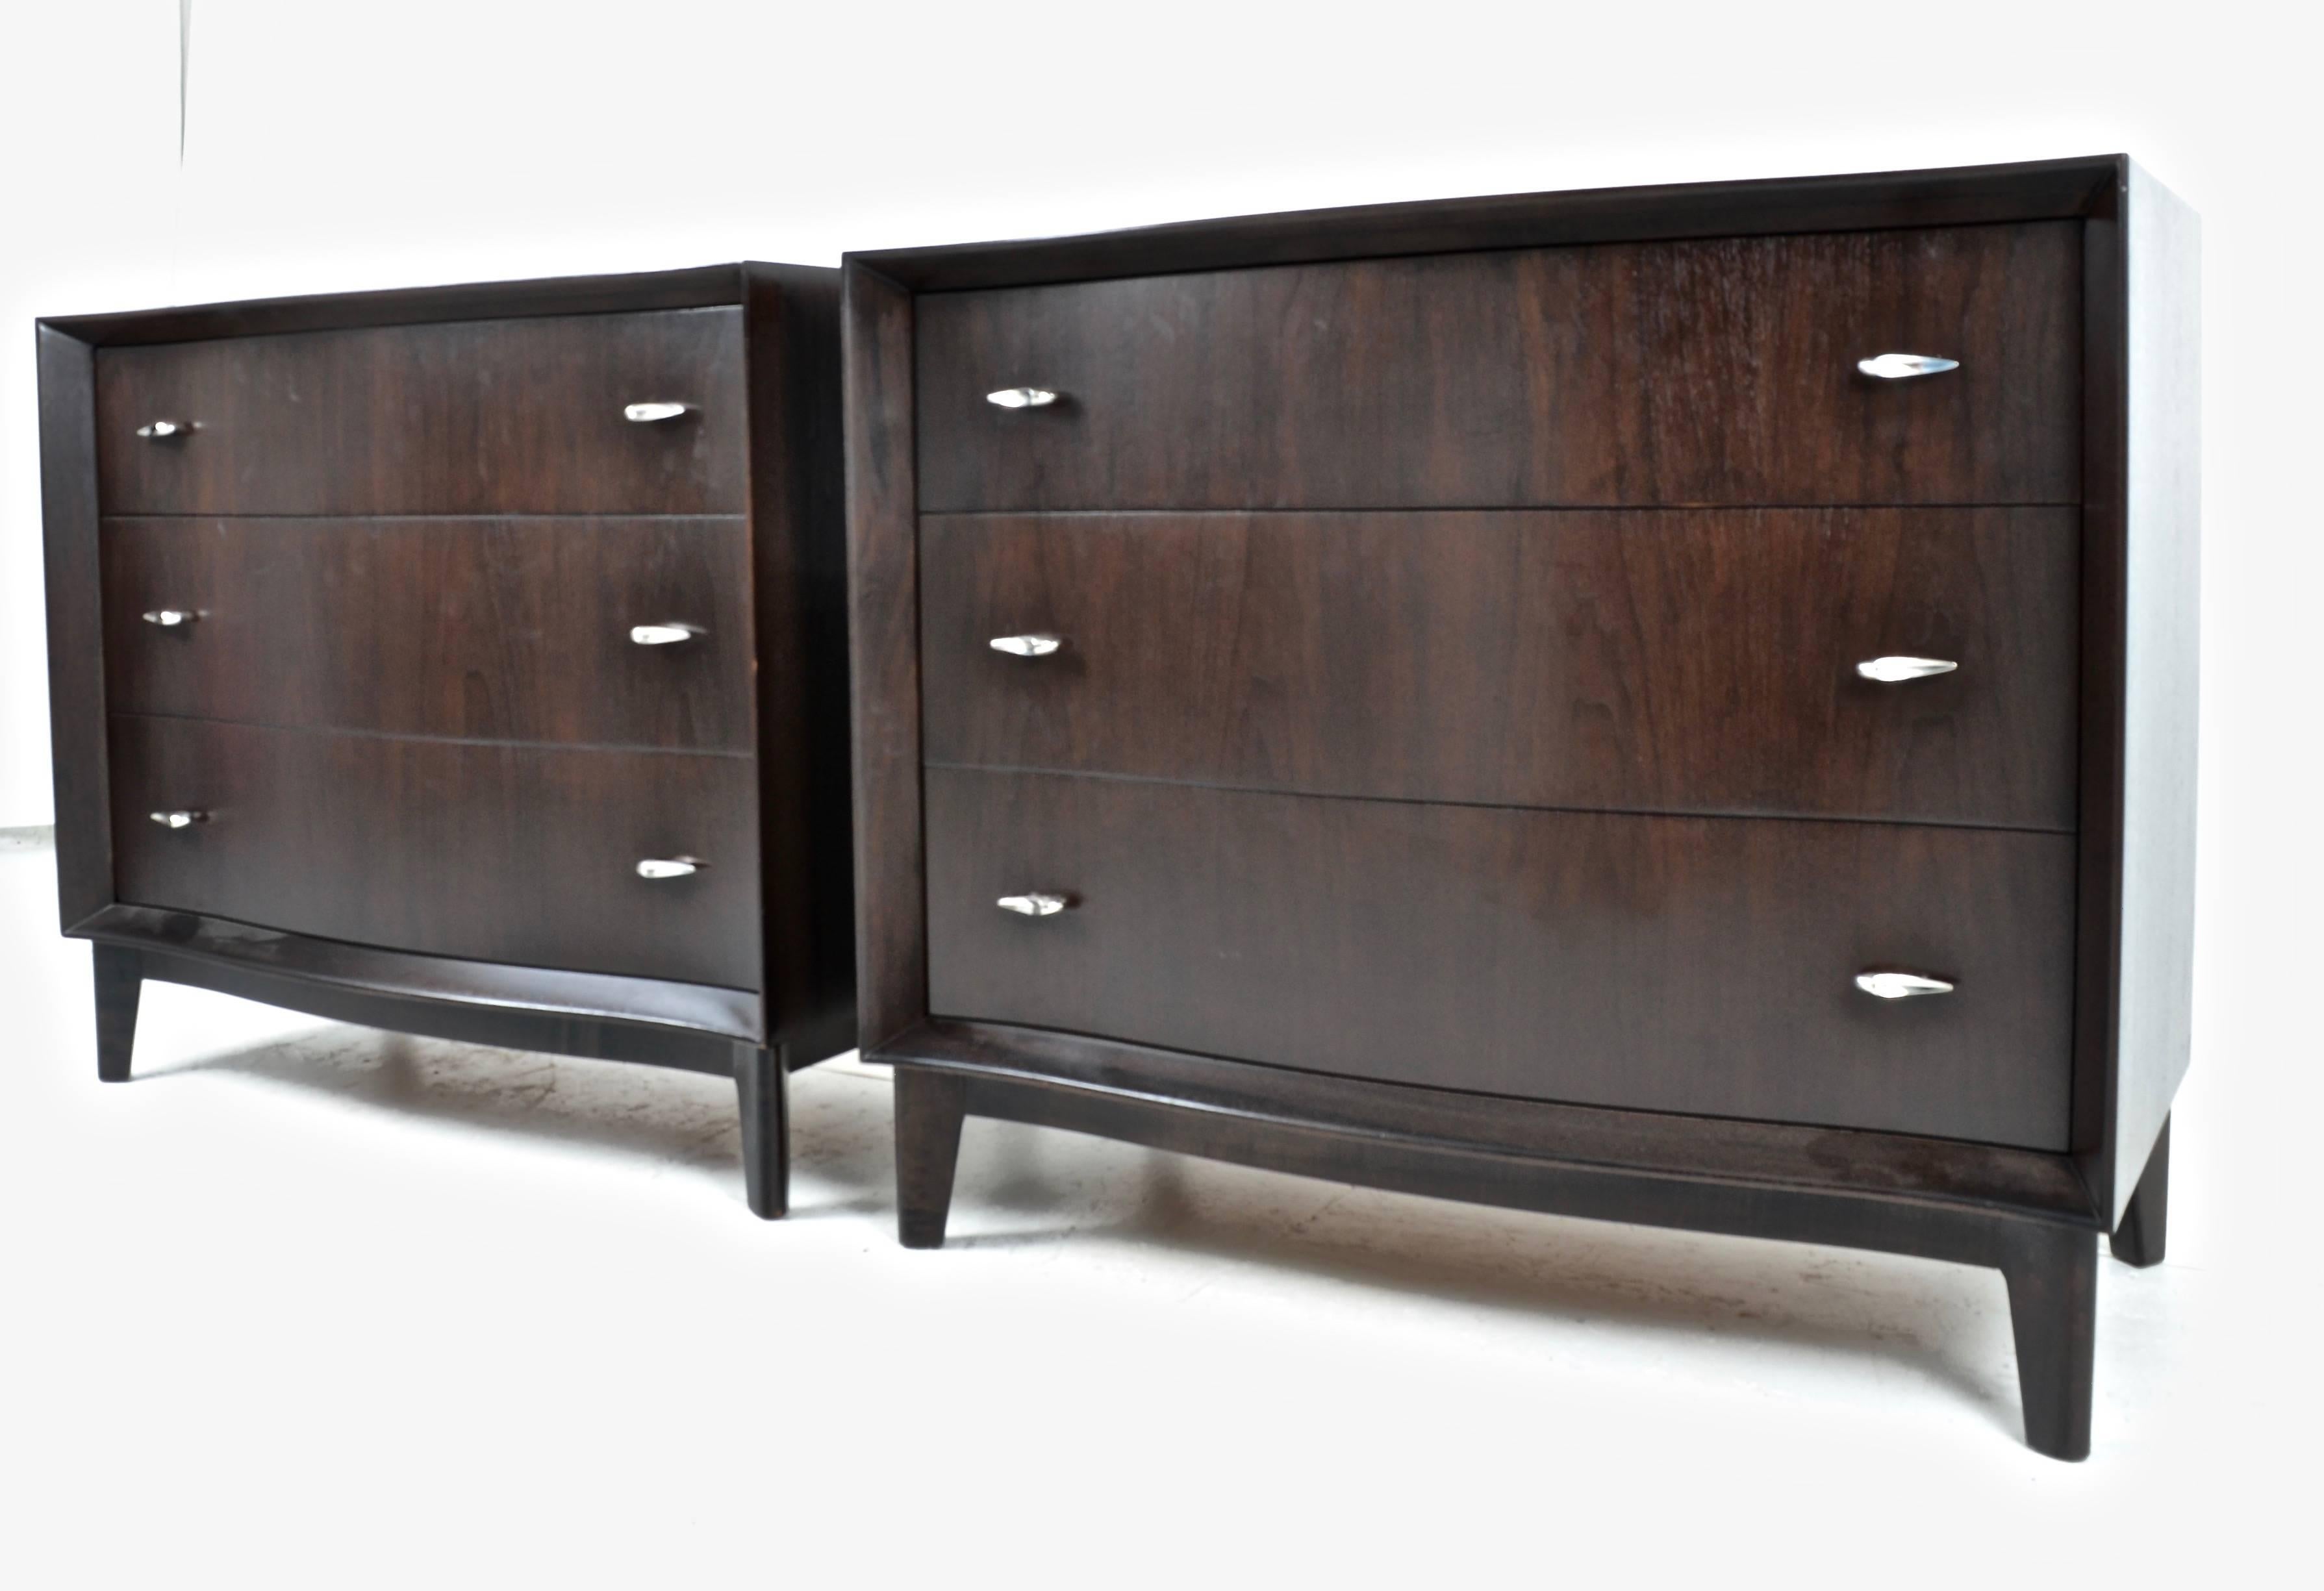 A handsome pair of modern chests in a dark coffee brown finish with original pulls, slightly serpentine with recessed drawers emphasizing flanged edge detail. Newly refinished.